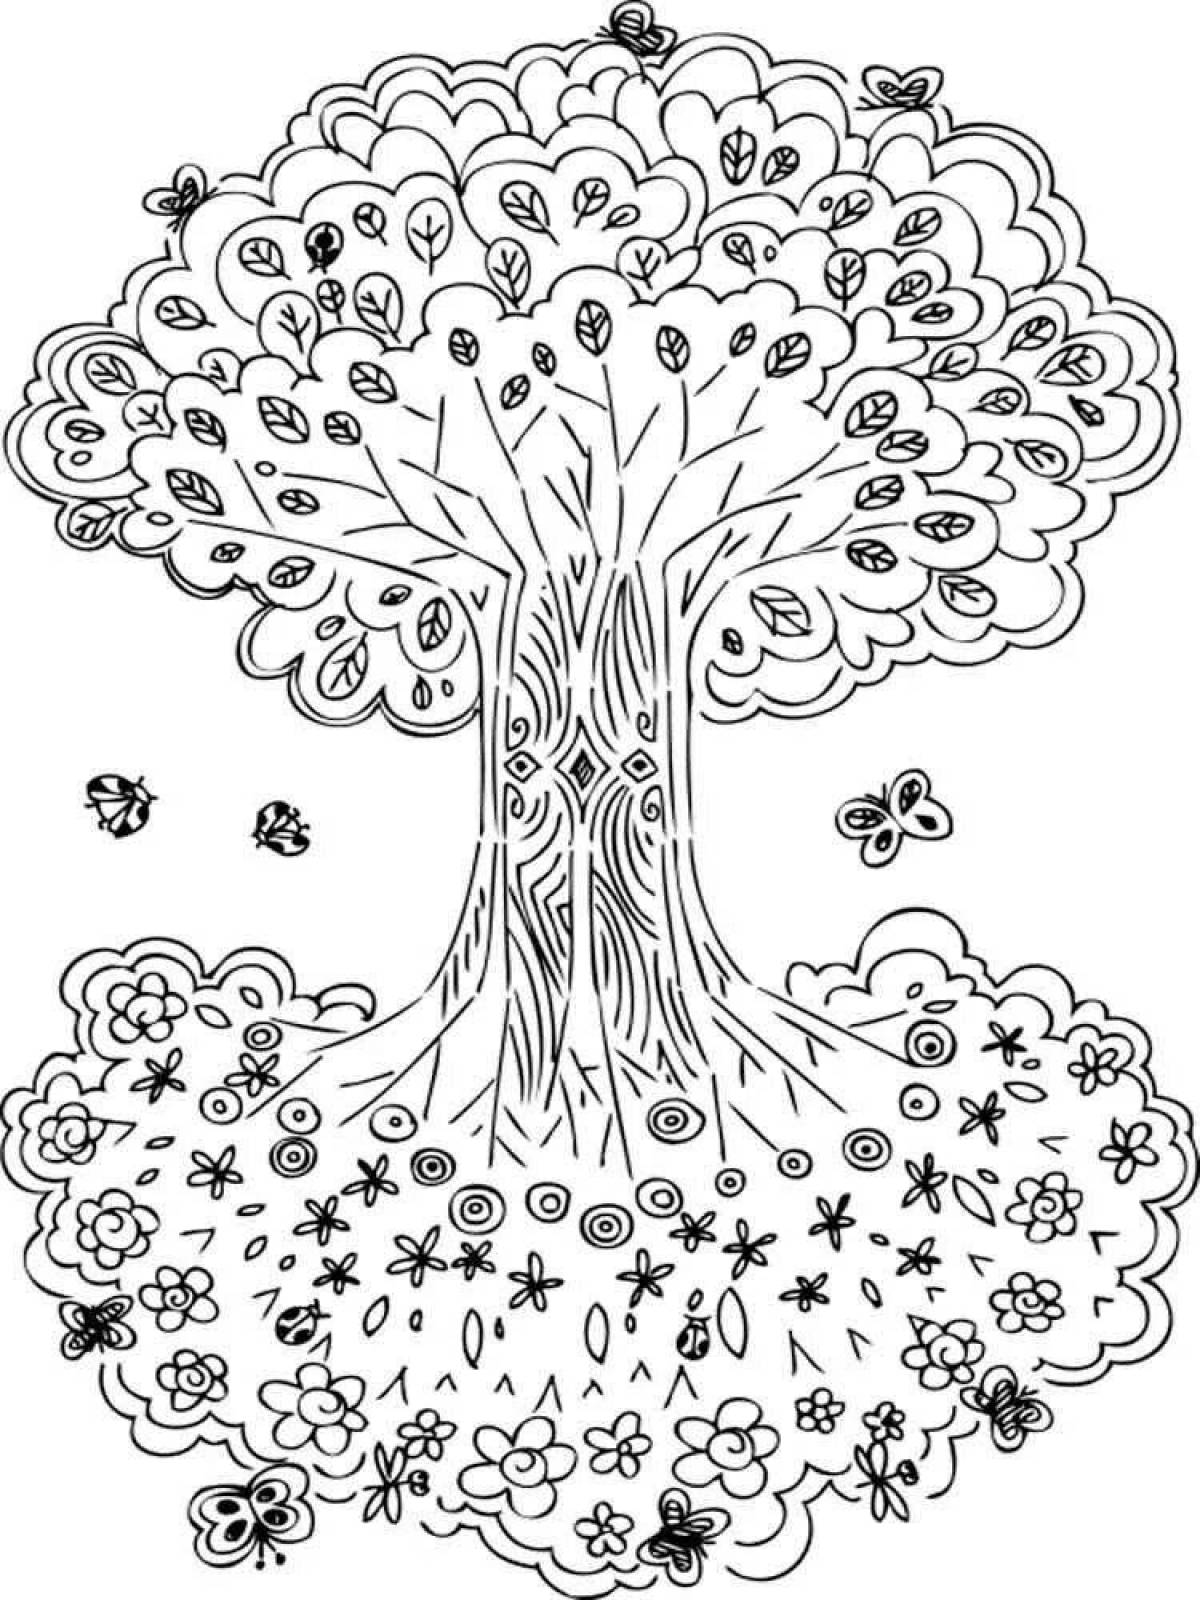 Coloring page elegant tree of life